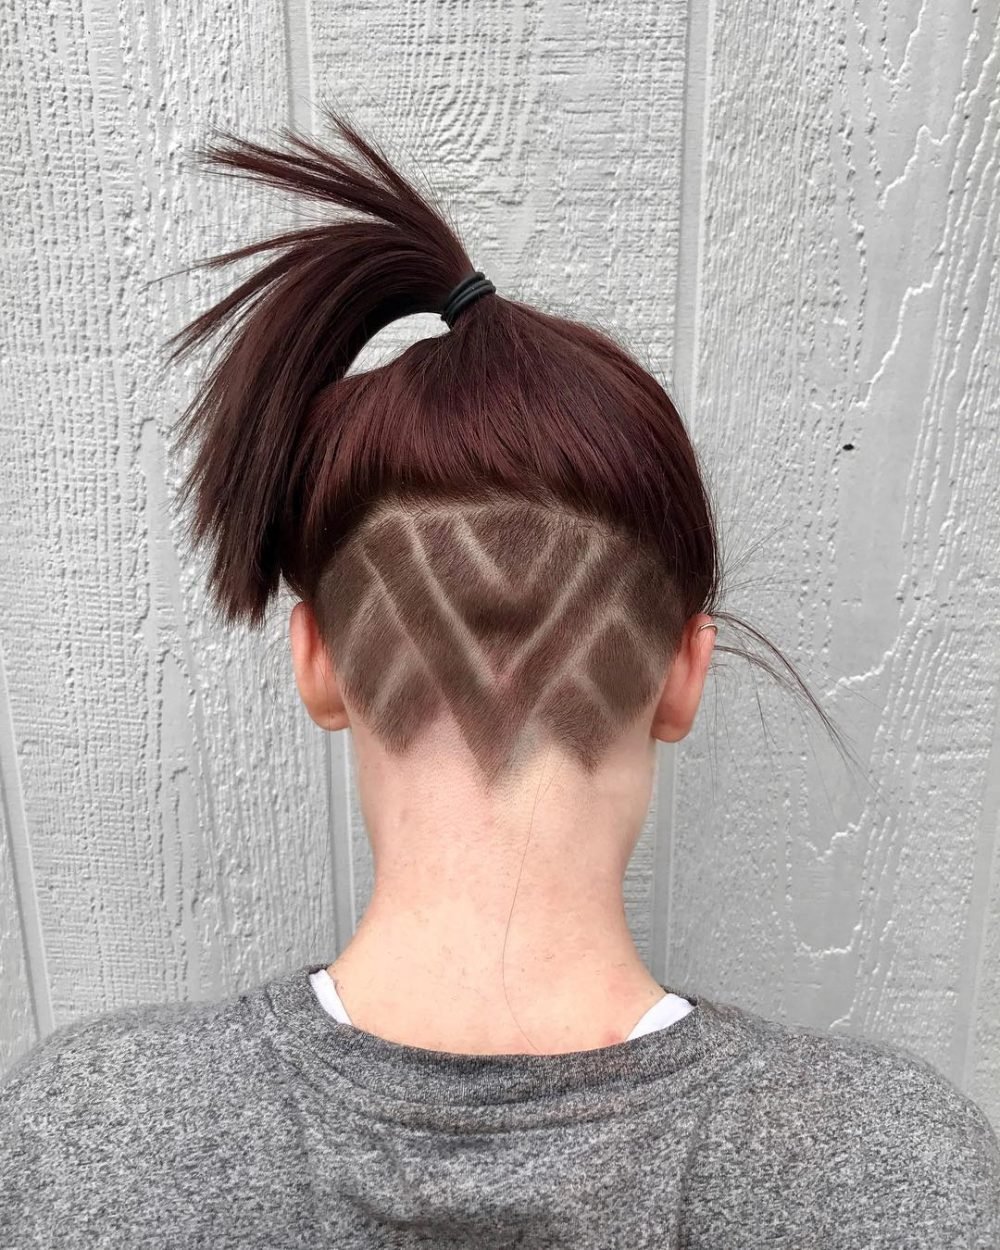 Ponytail Undercut Hairstyle with Geometric Tattoo Design